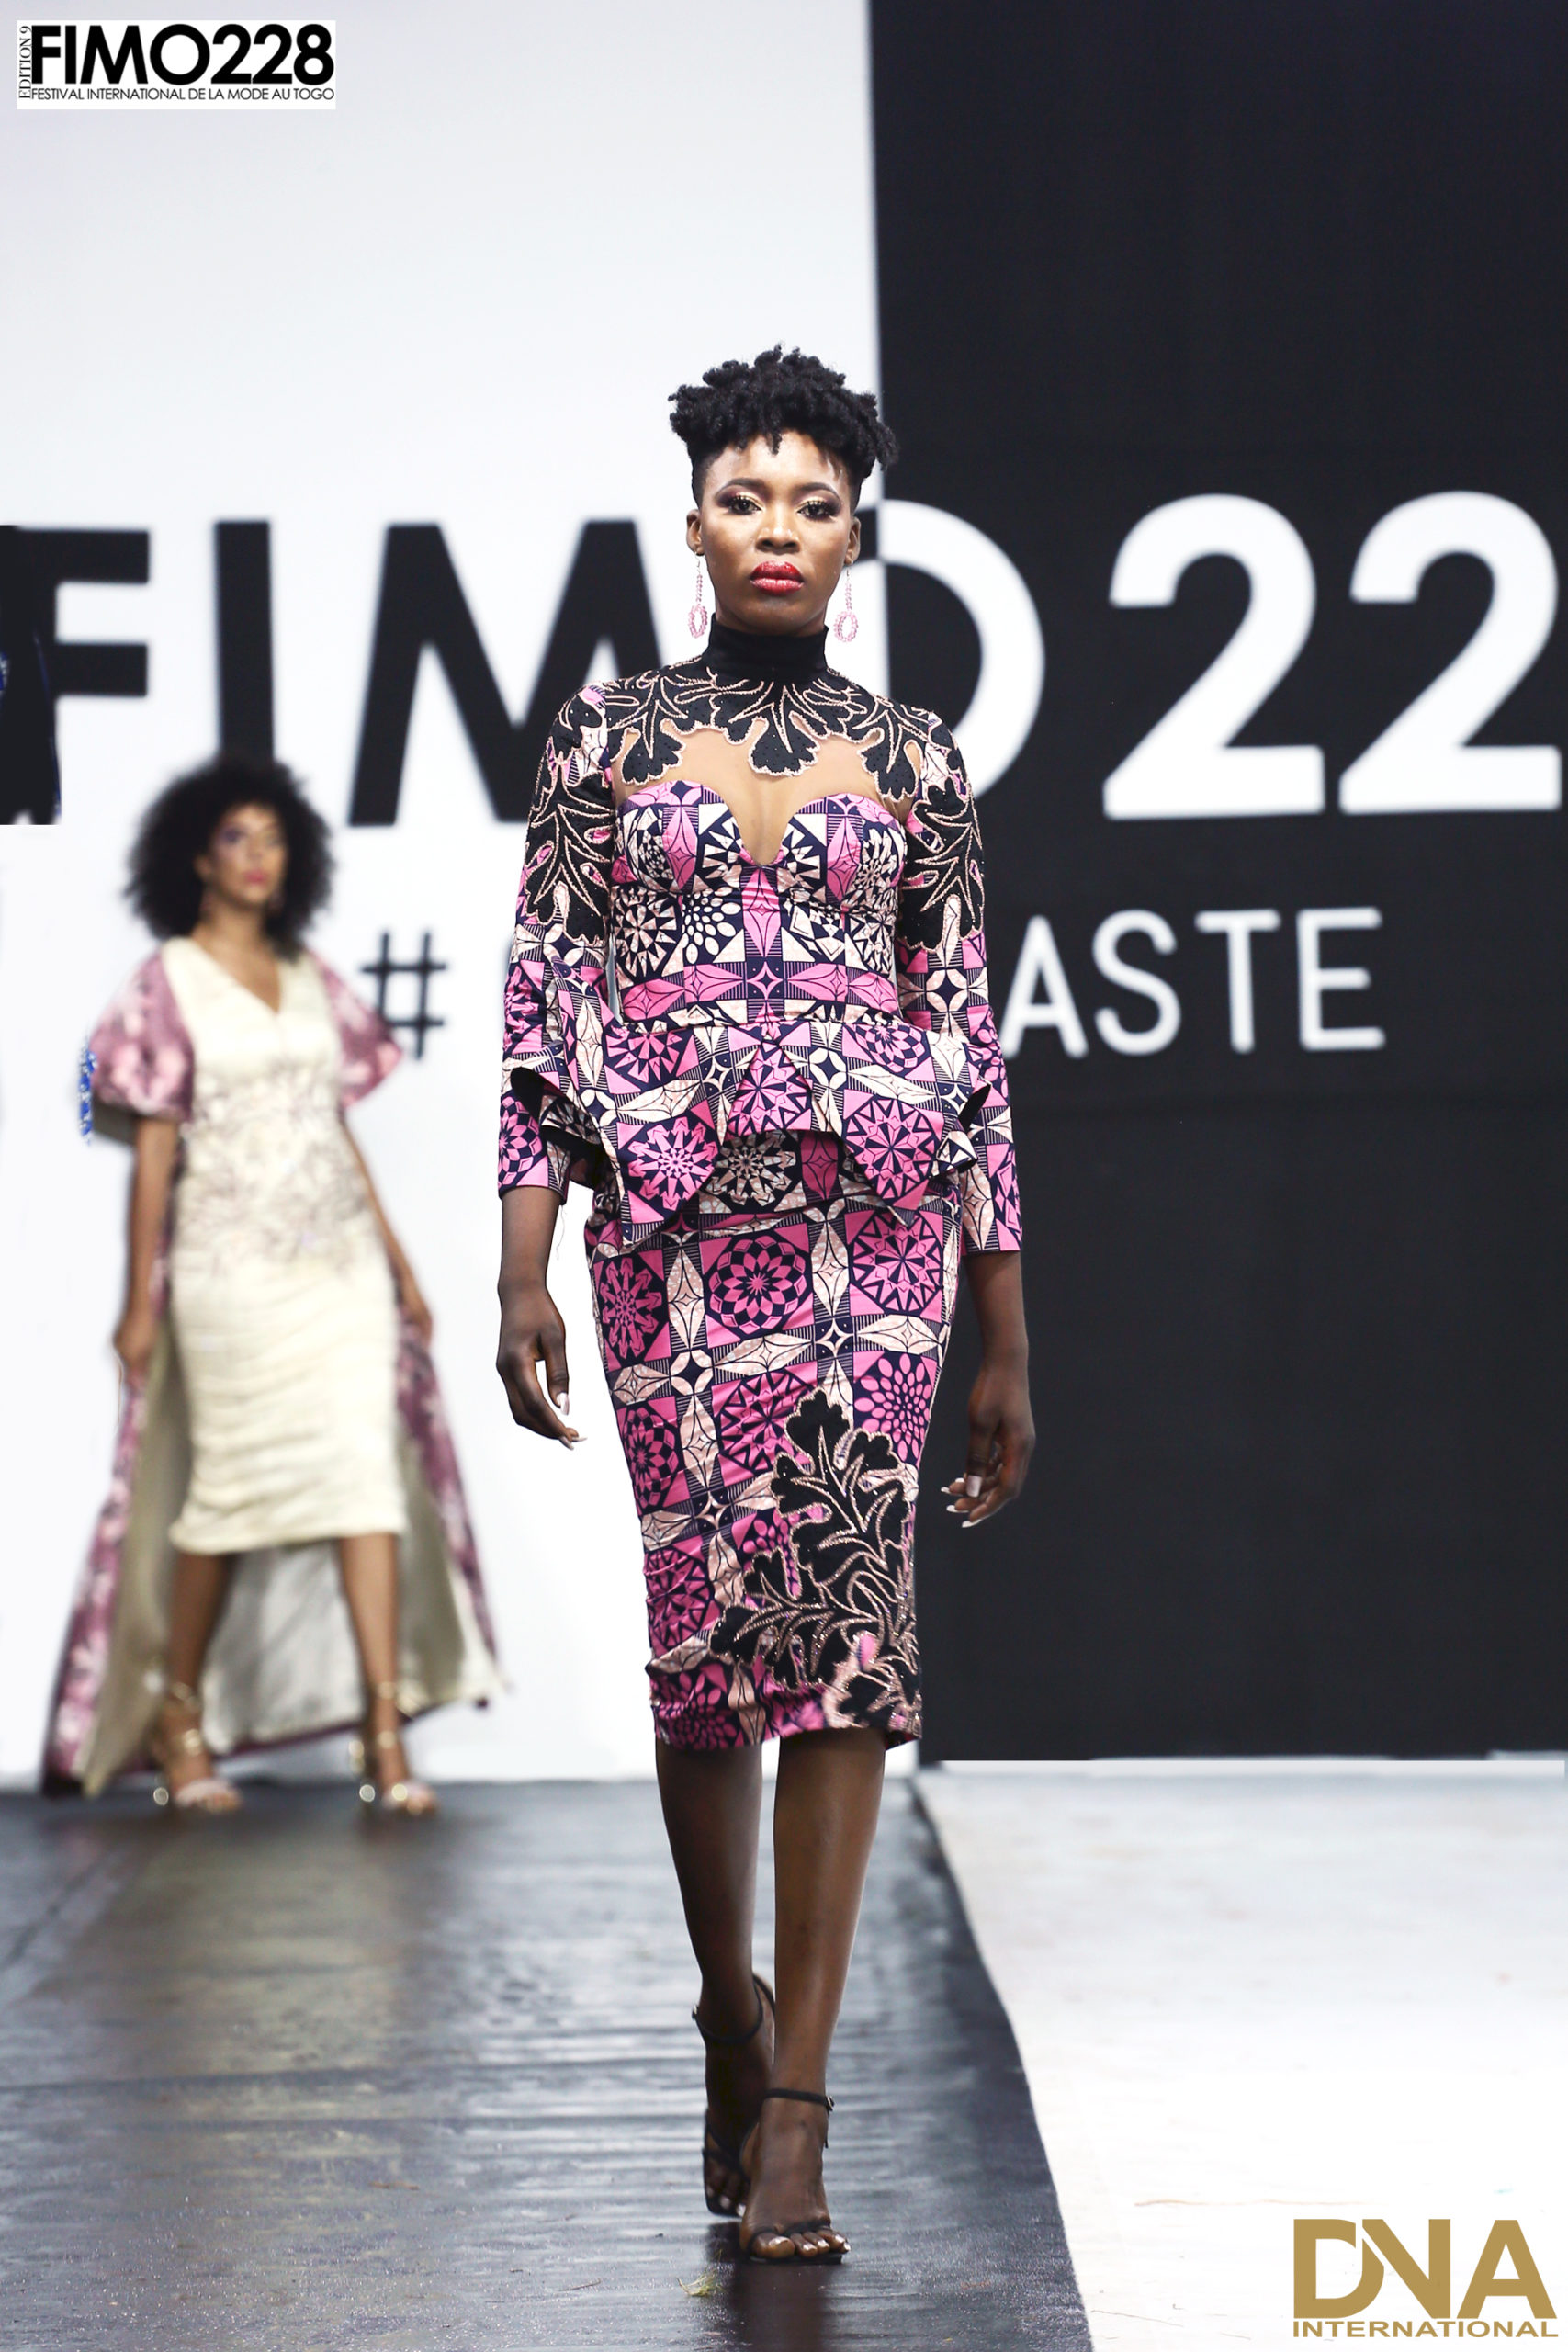 Crédaniah-Fashion-House-Collection -Couture-MIAWEZON-FIMO228-Edition-9-from-Lome-TOGO-2022-DN-A-INTERNATIONAL-Media-Partner-MD0A3463